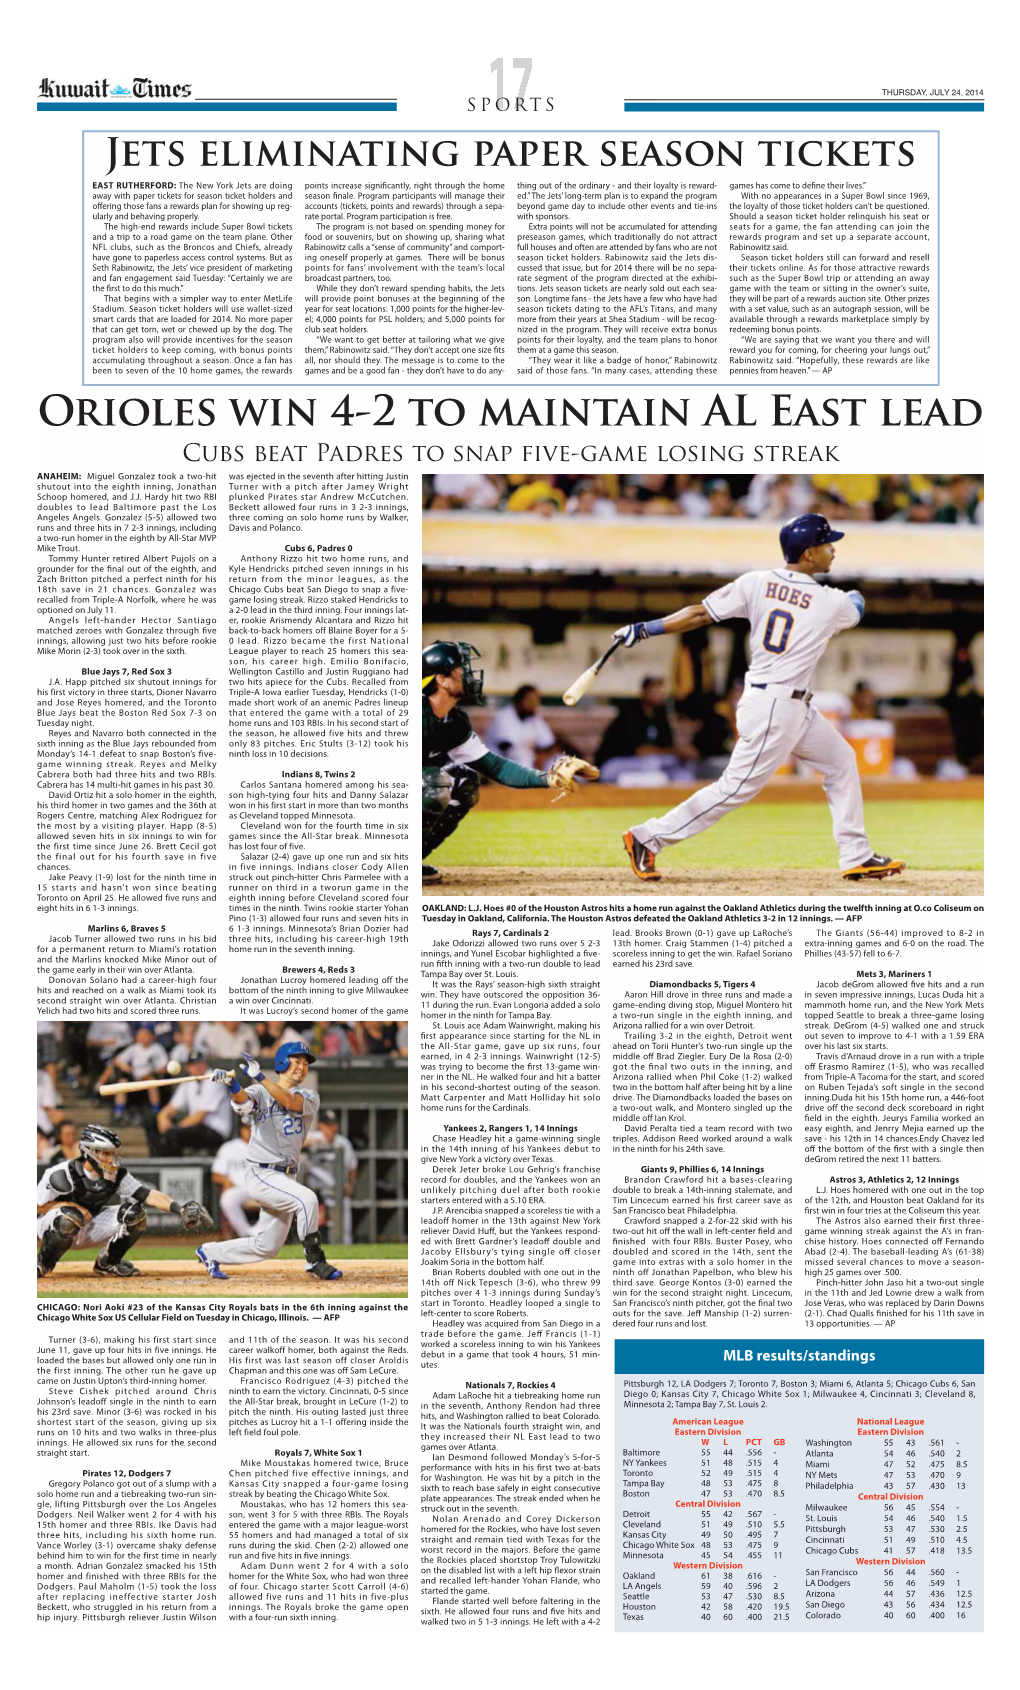 Orioles Win 4-2 to Maintain AL East Lead Cubs Beat Padres to Snap Five-Game Losing Streak